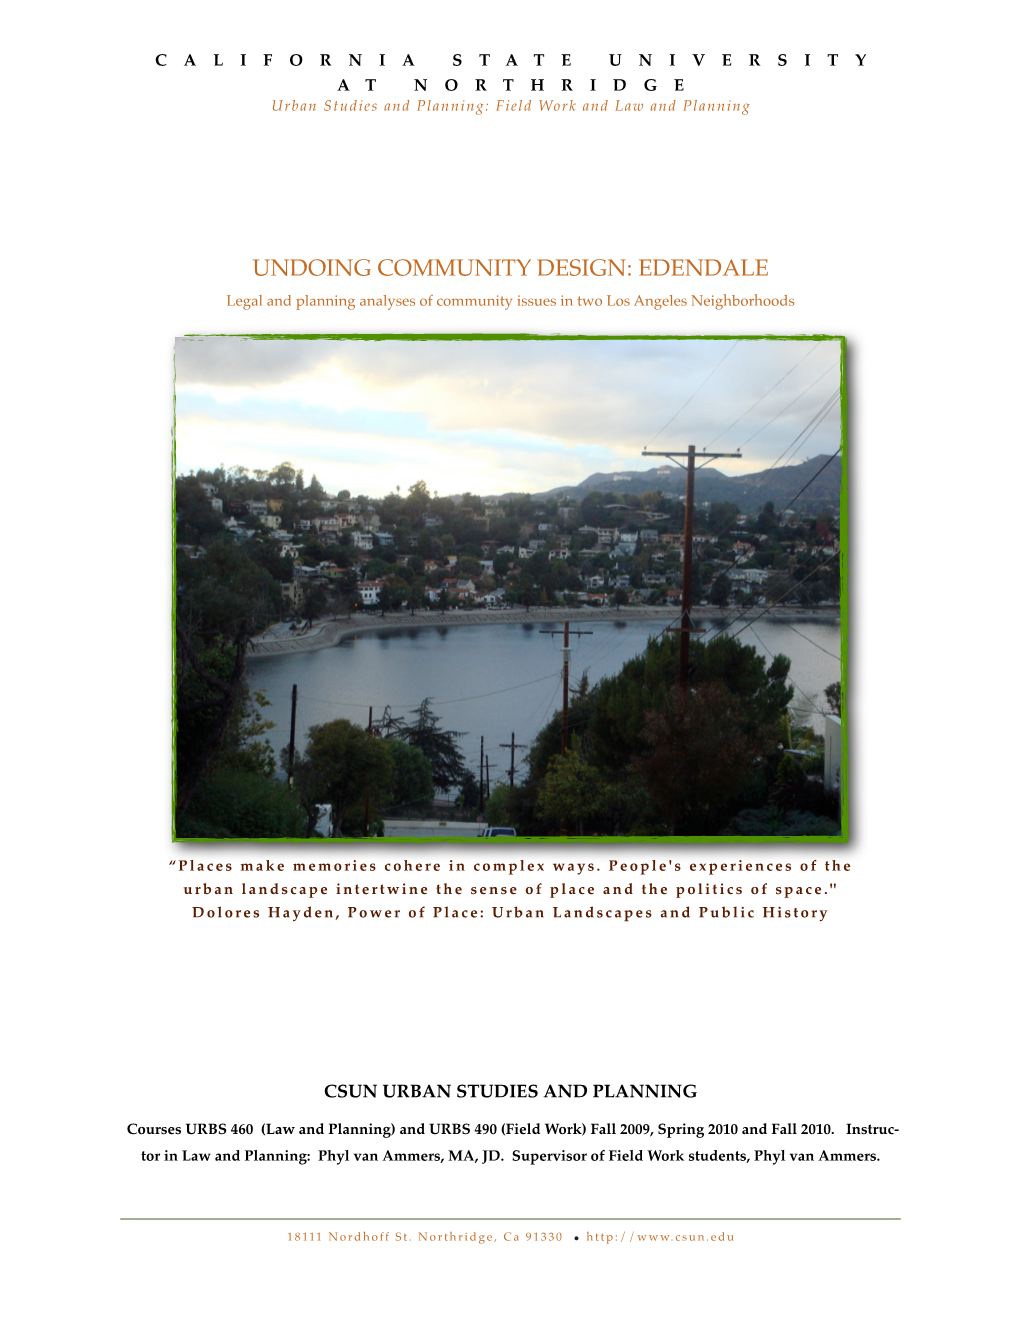 UNDOING COMMUNITY DESIGN: EDENDALE Legal and Planning Analyses of Community Issues in Two Los Angeles Neighborhoods